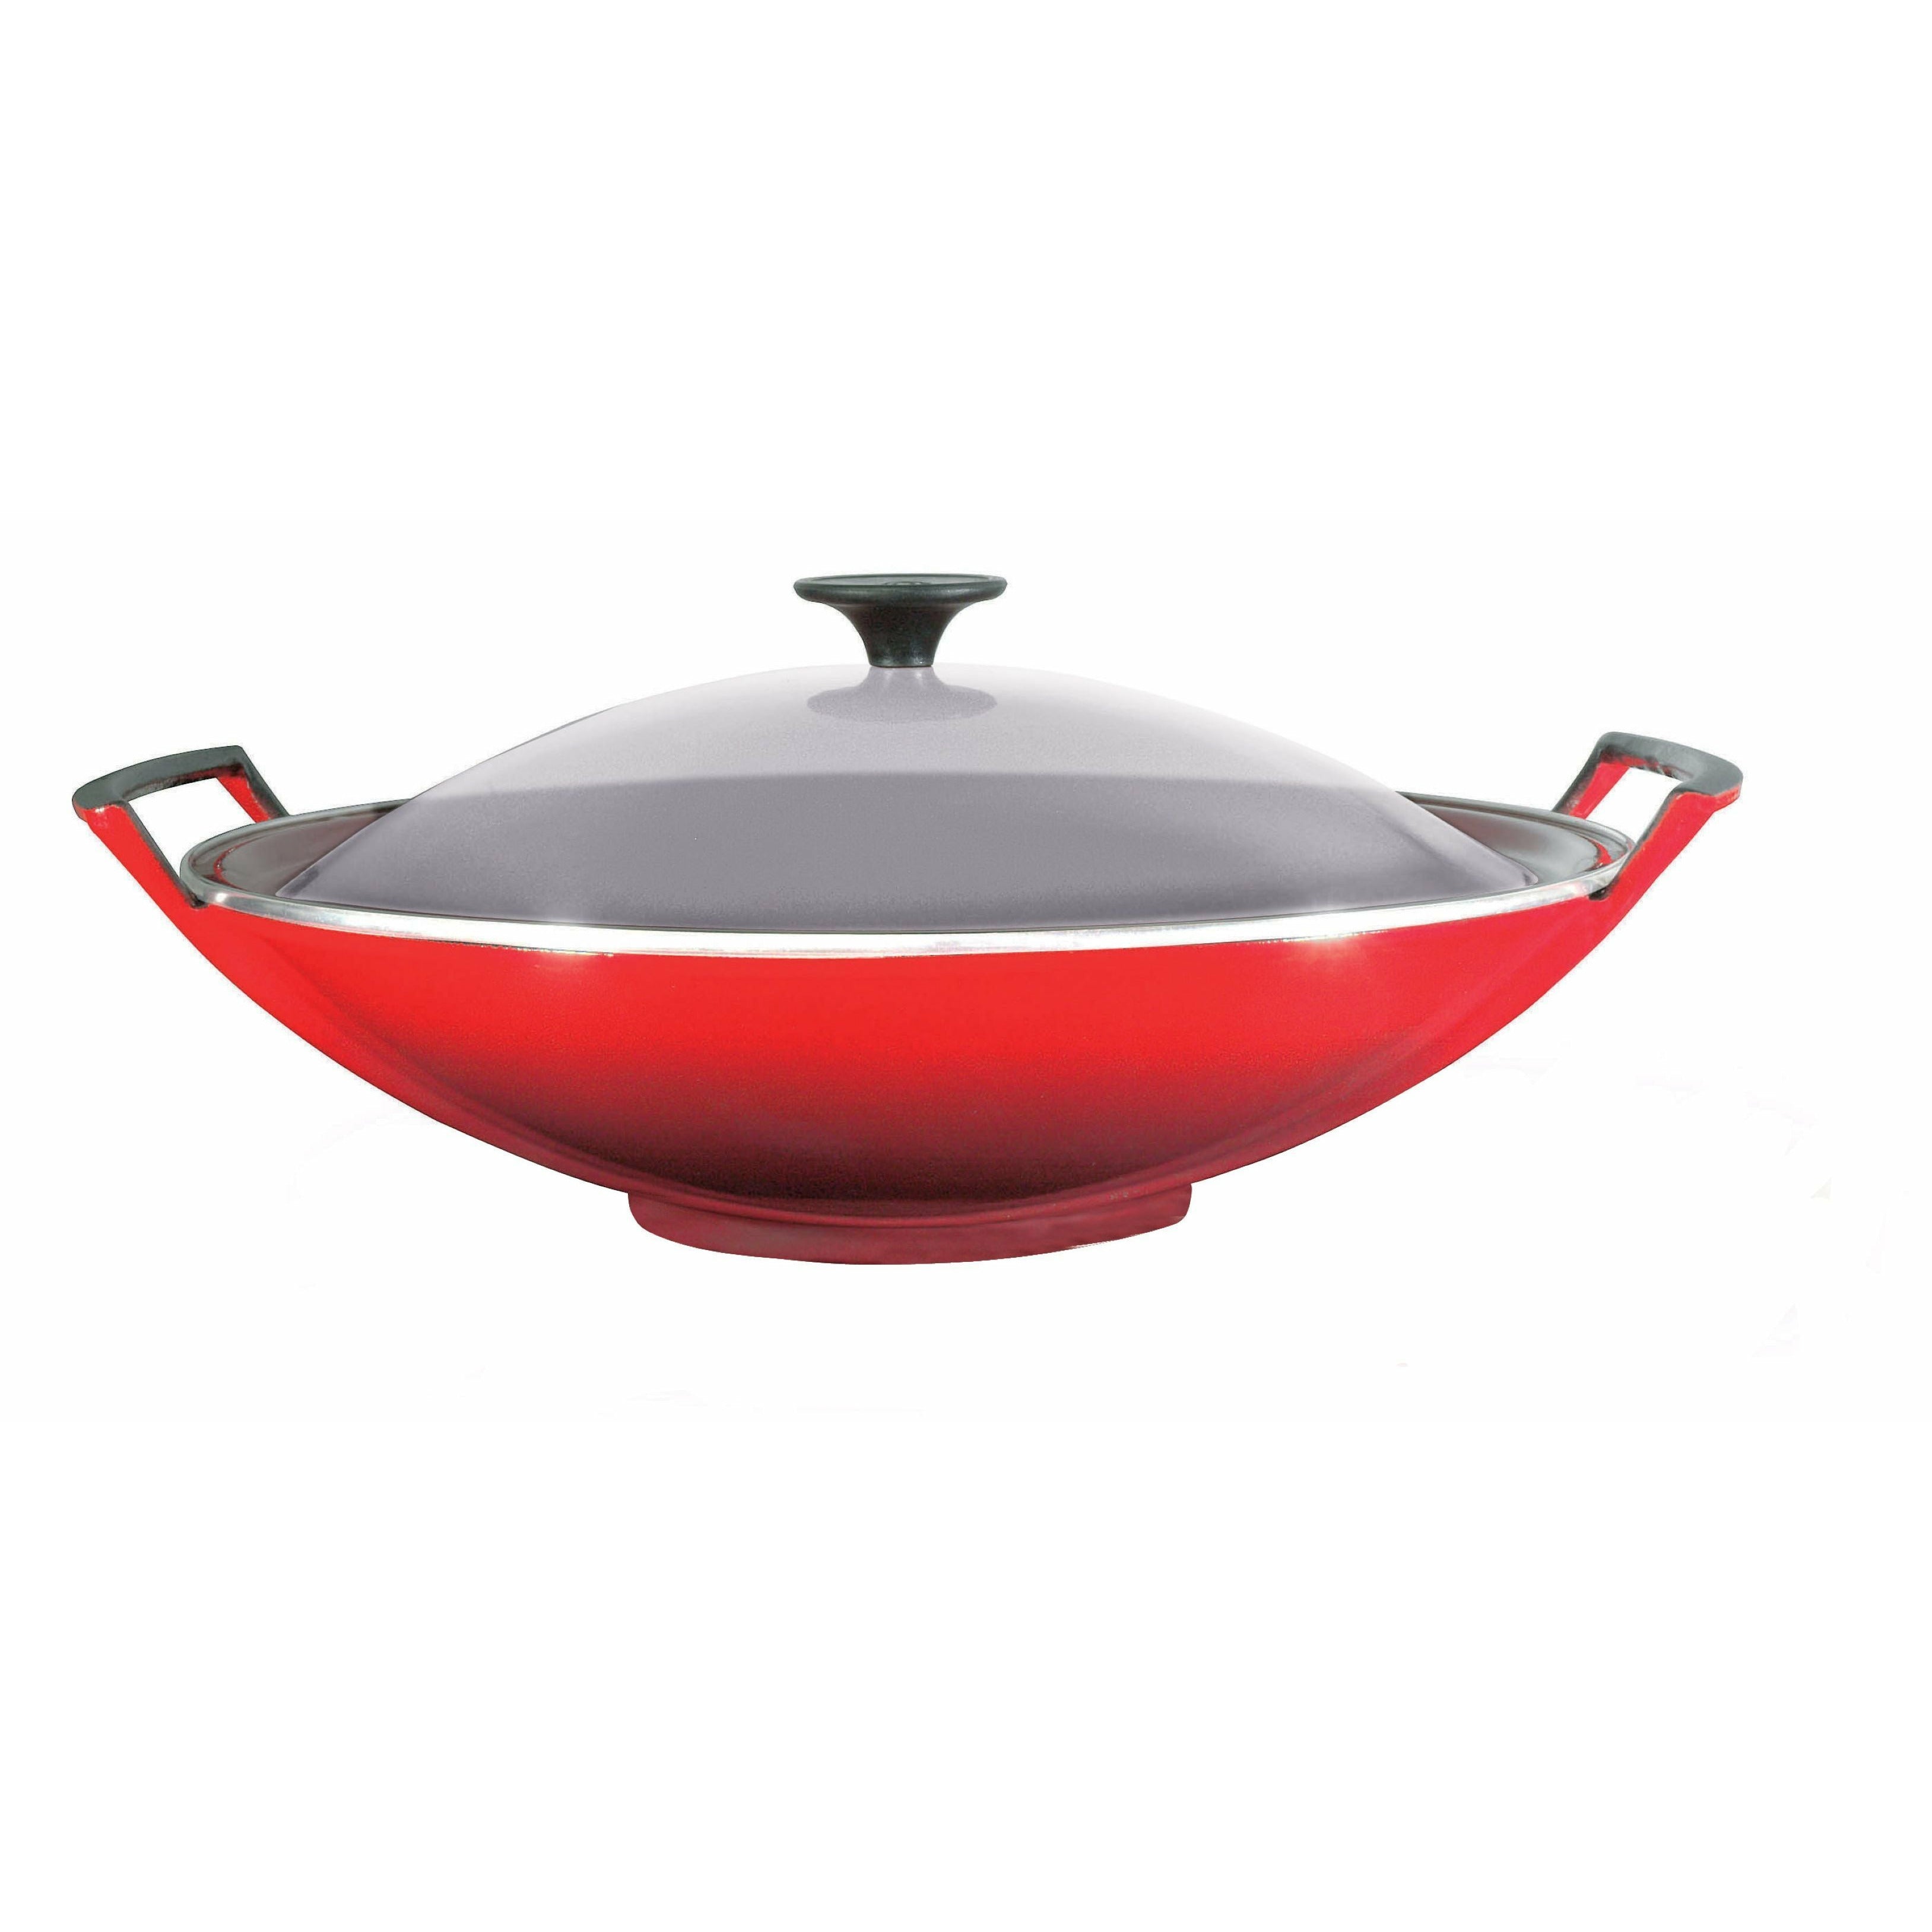 Le Creuset Wok With Glass Lid 36 Cm, Cherry Red